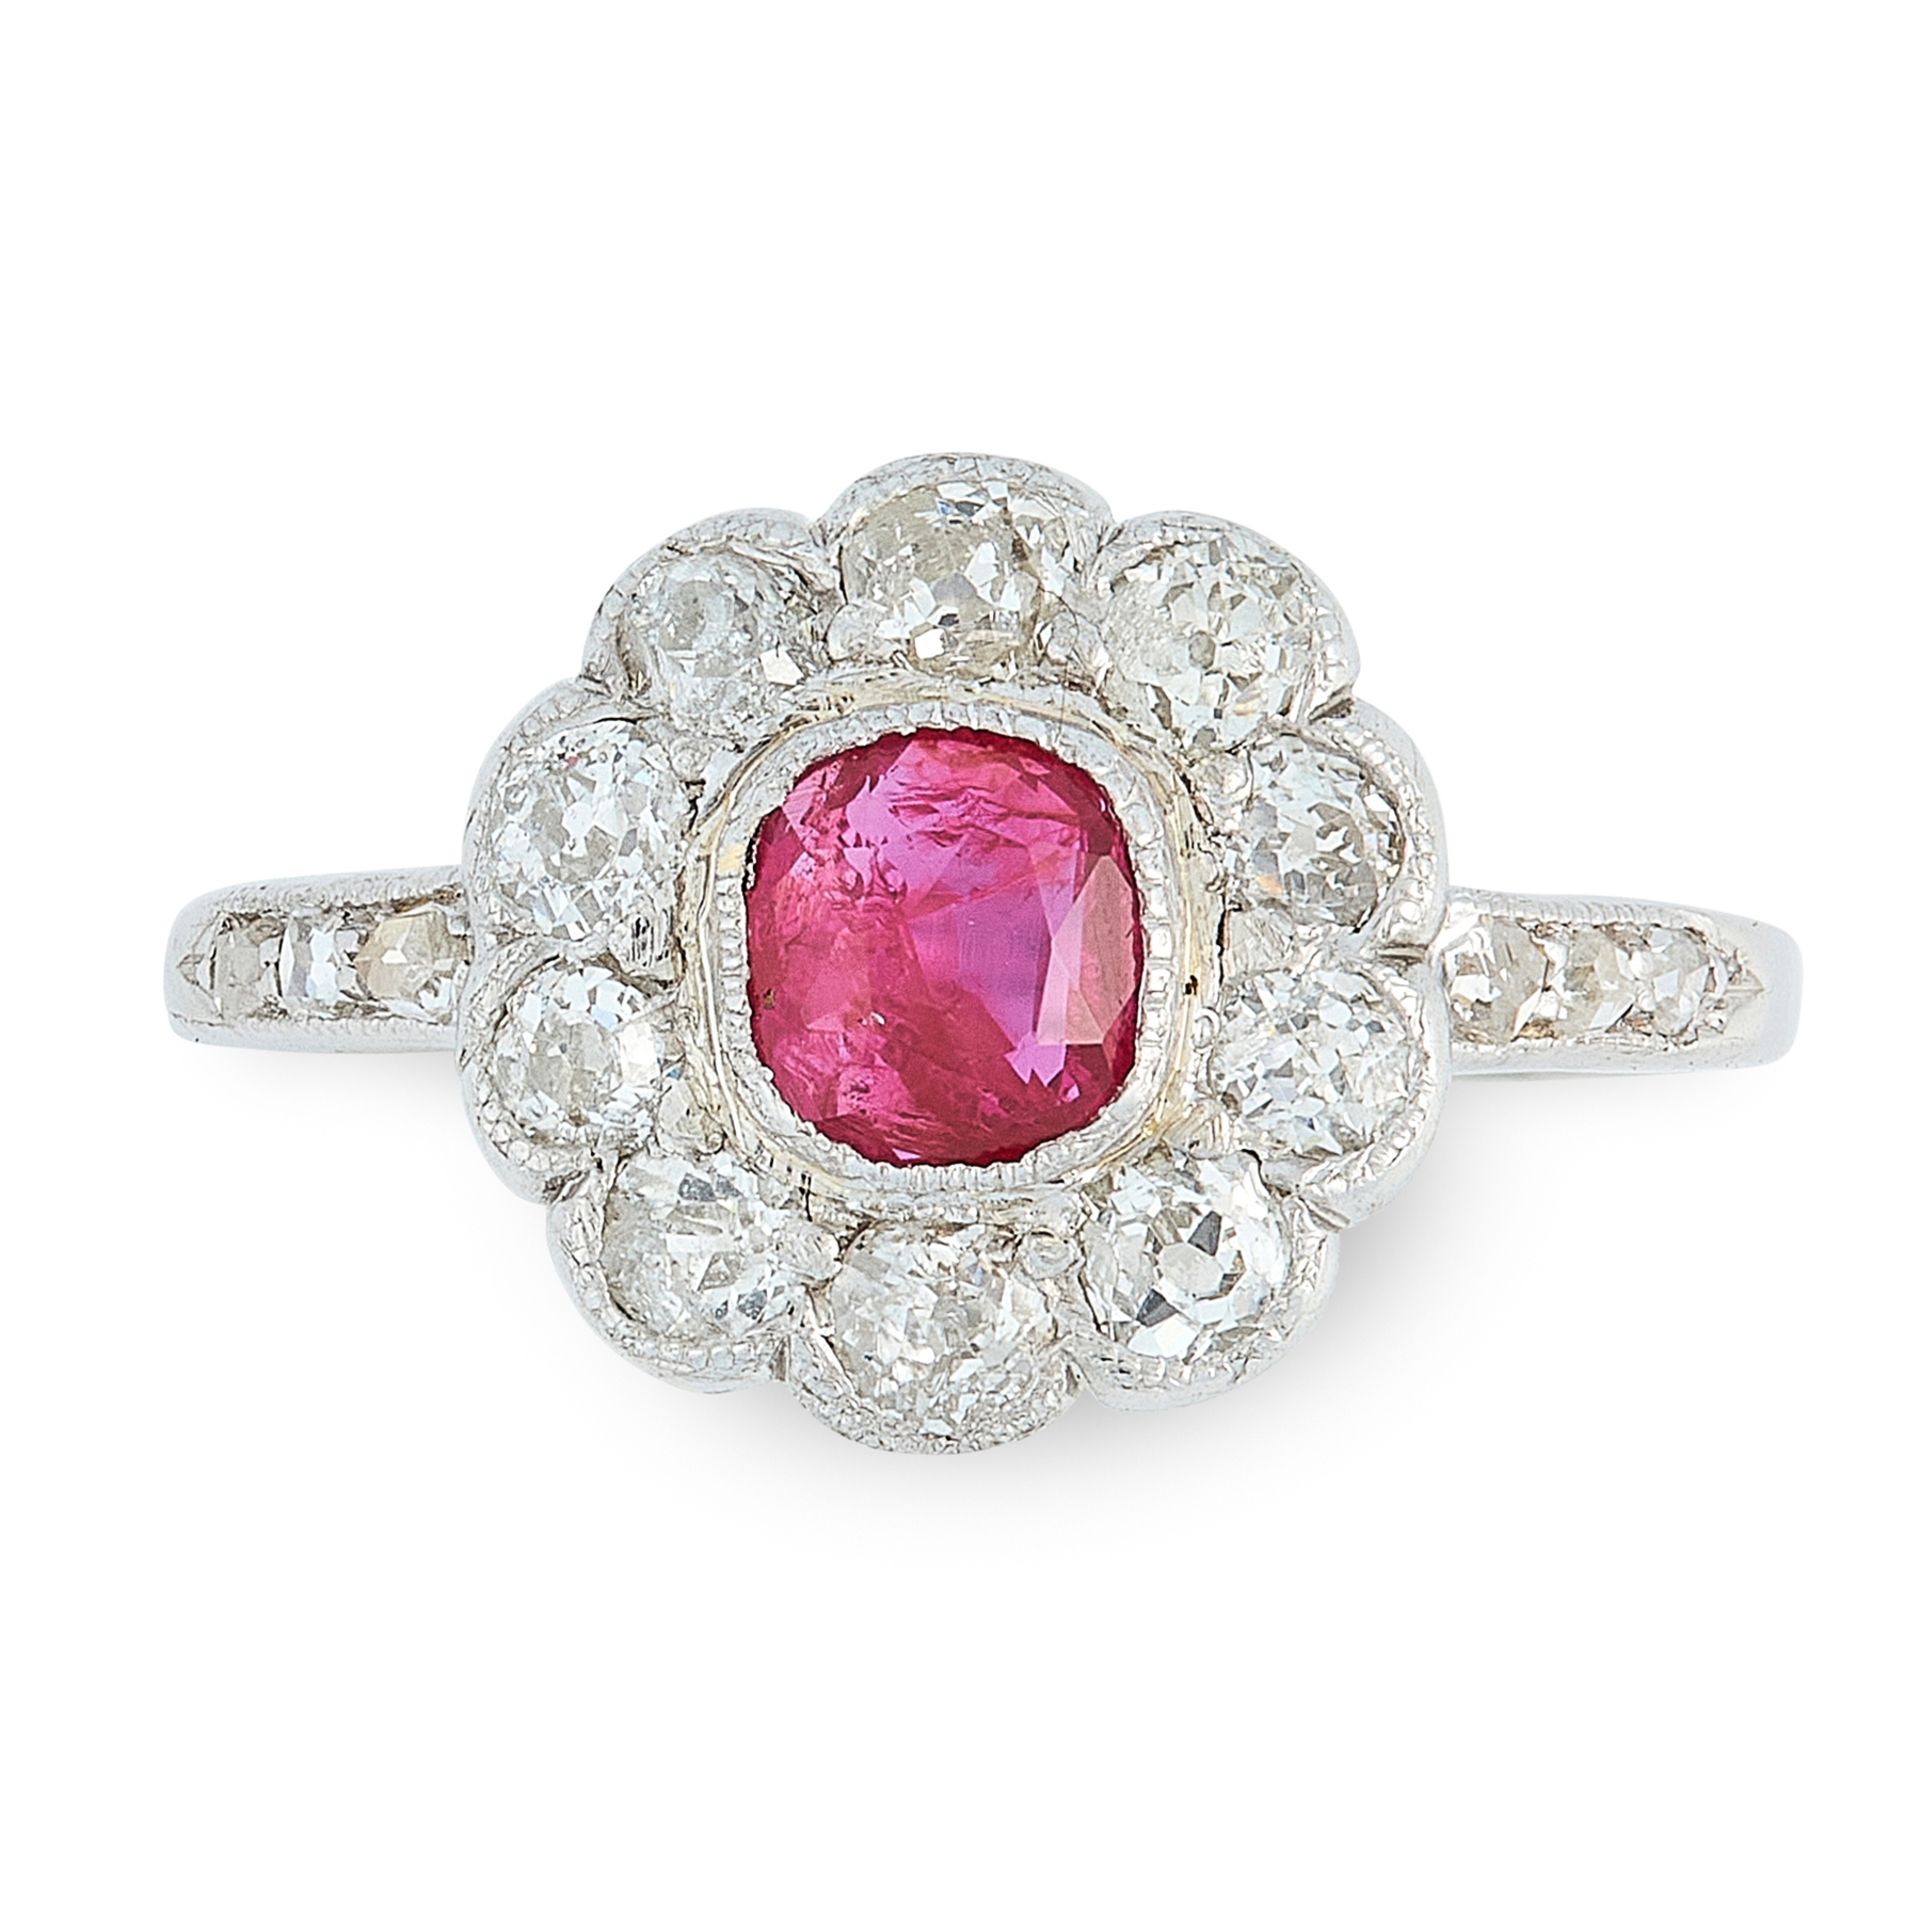 A RUBY AND DIAMOND CLUSTER RING set with a central cushion ruby of 0.50 carats within a border of